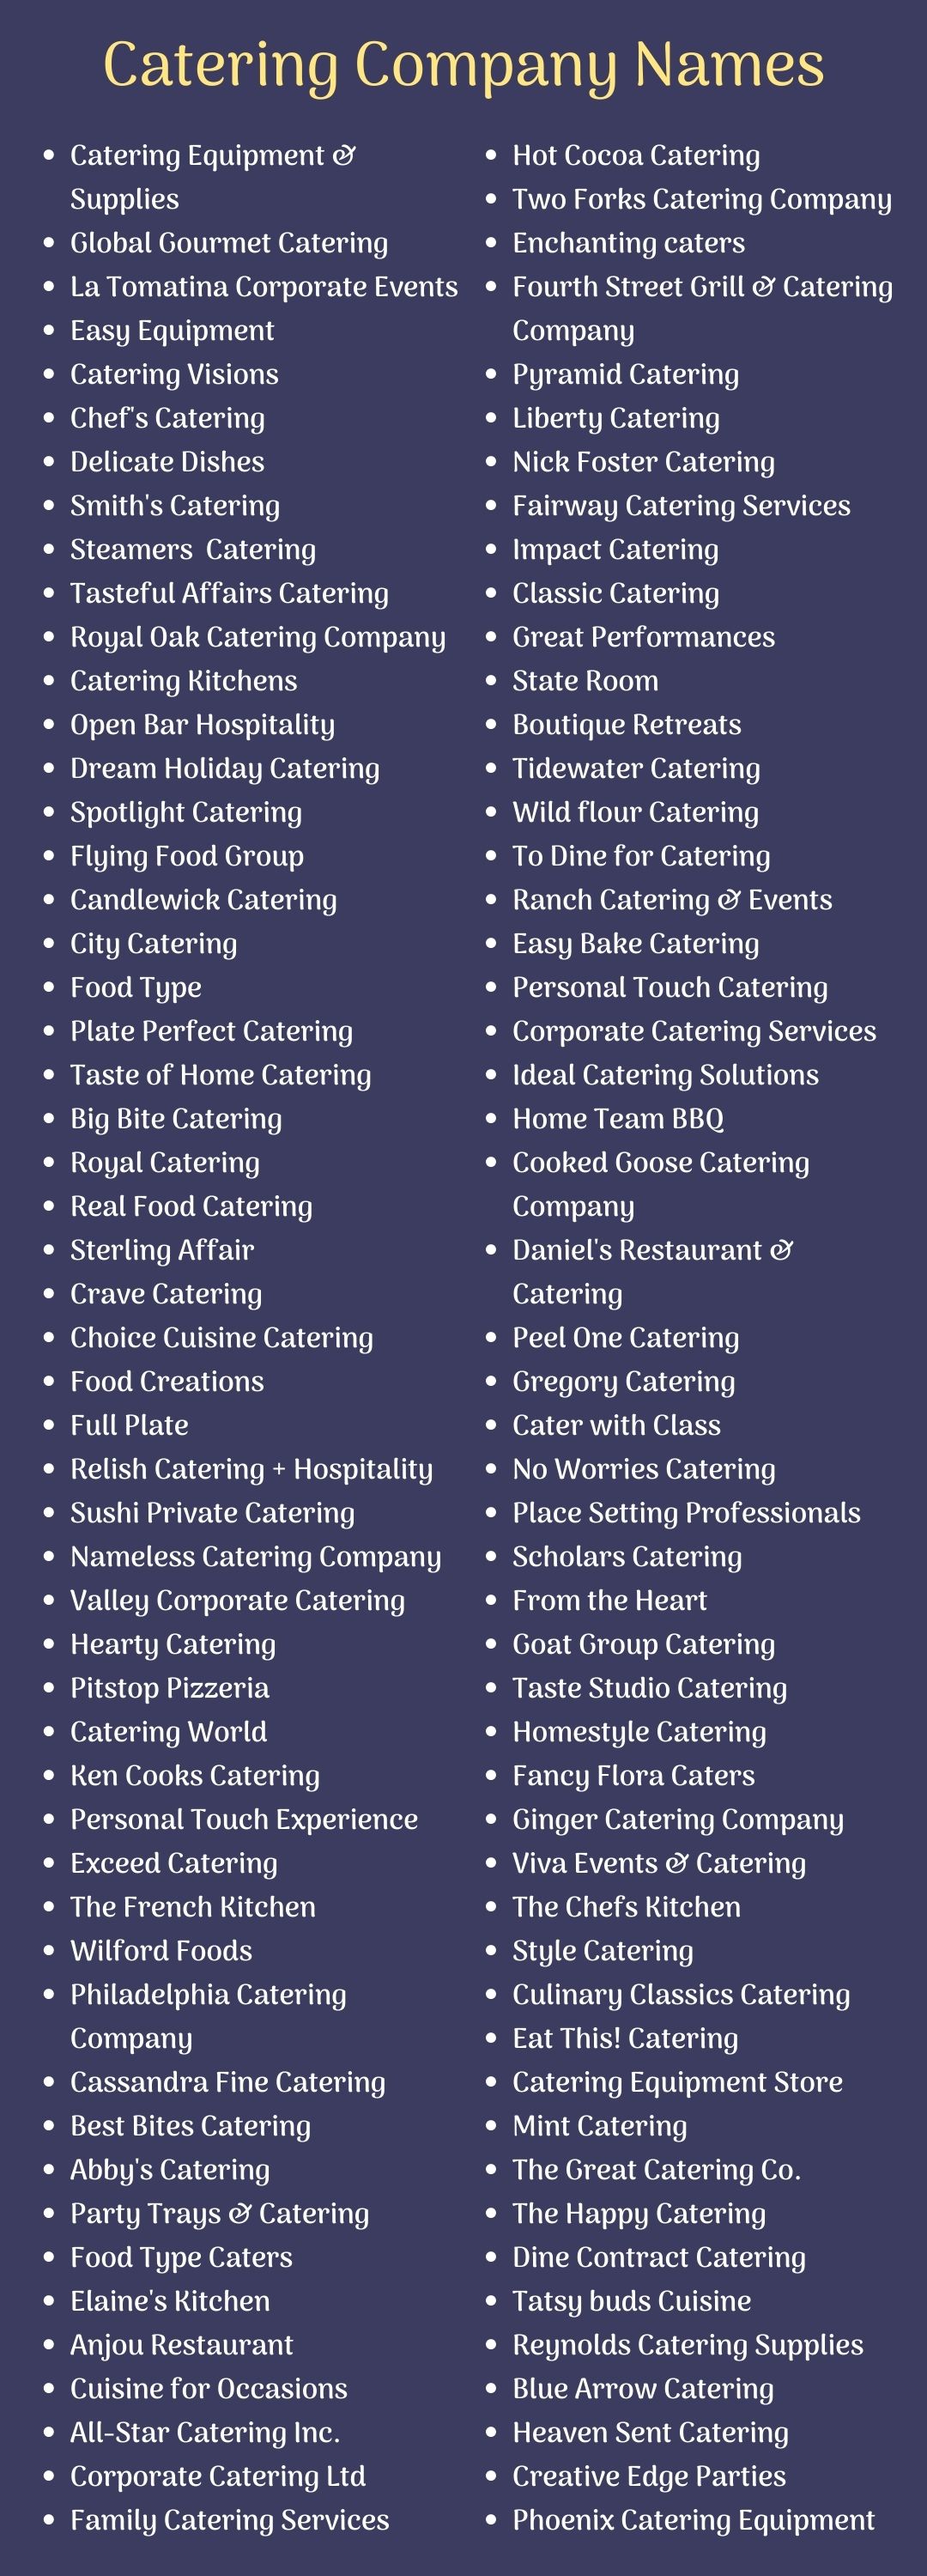 Catering Company Names ideas 